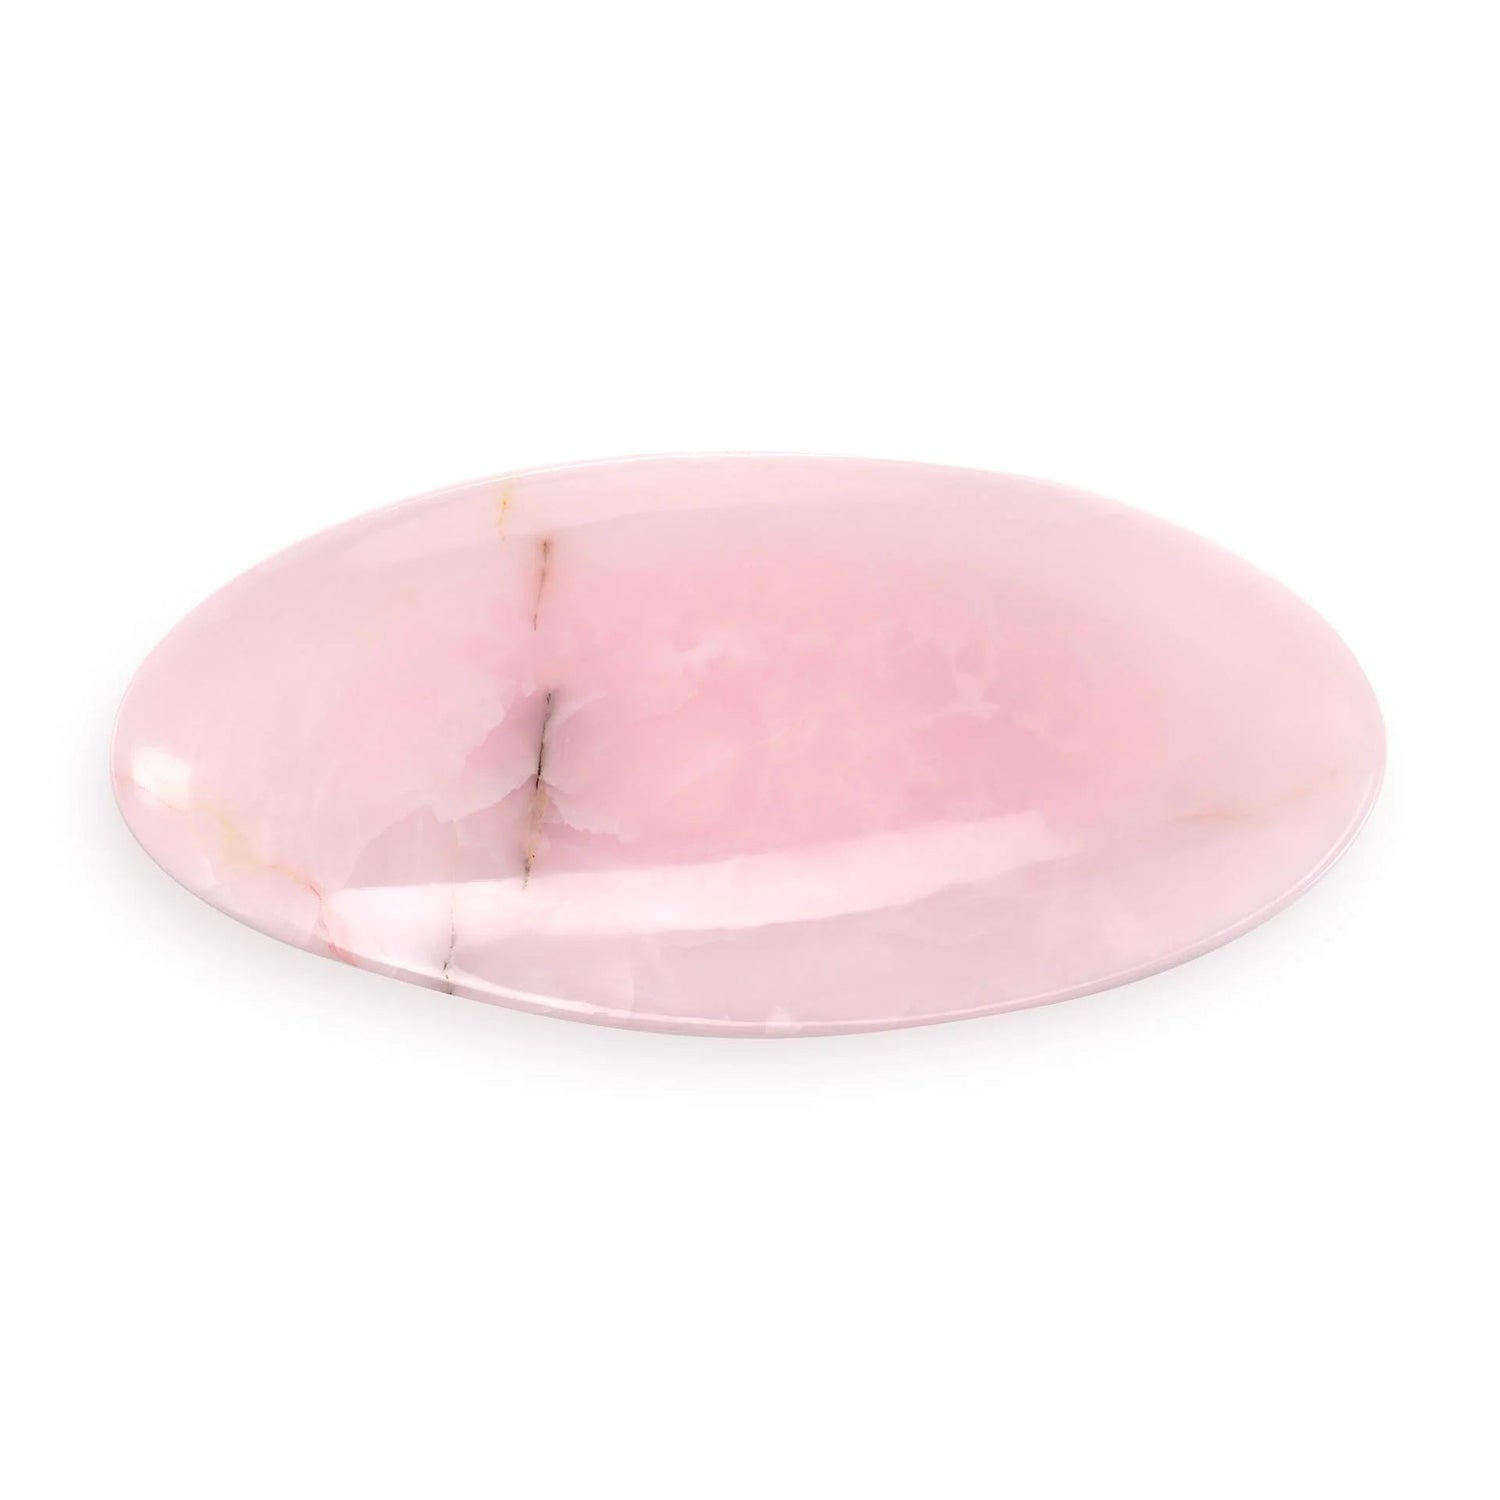 Pink Onyx Solid Carved Bowl in Medium - Elsa Home And Beauty